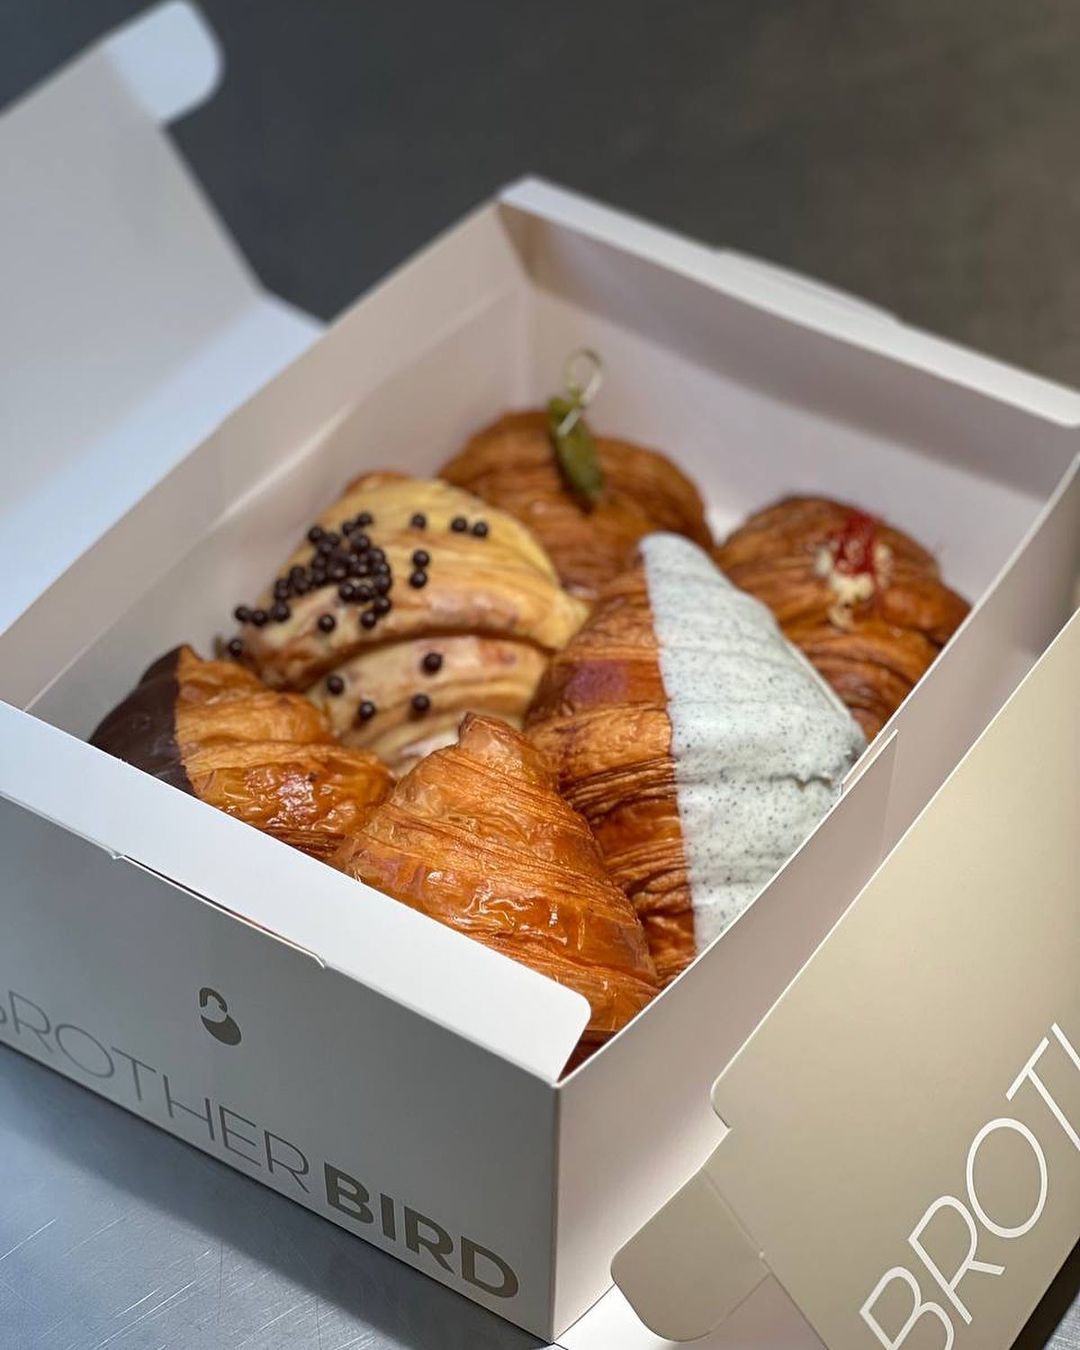 brotherbird bakehouse - monthly box